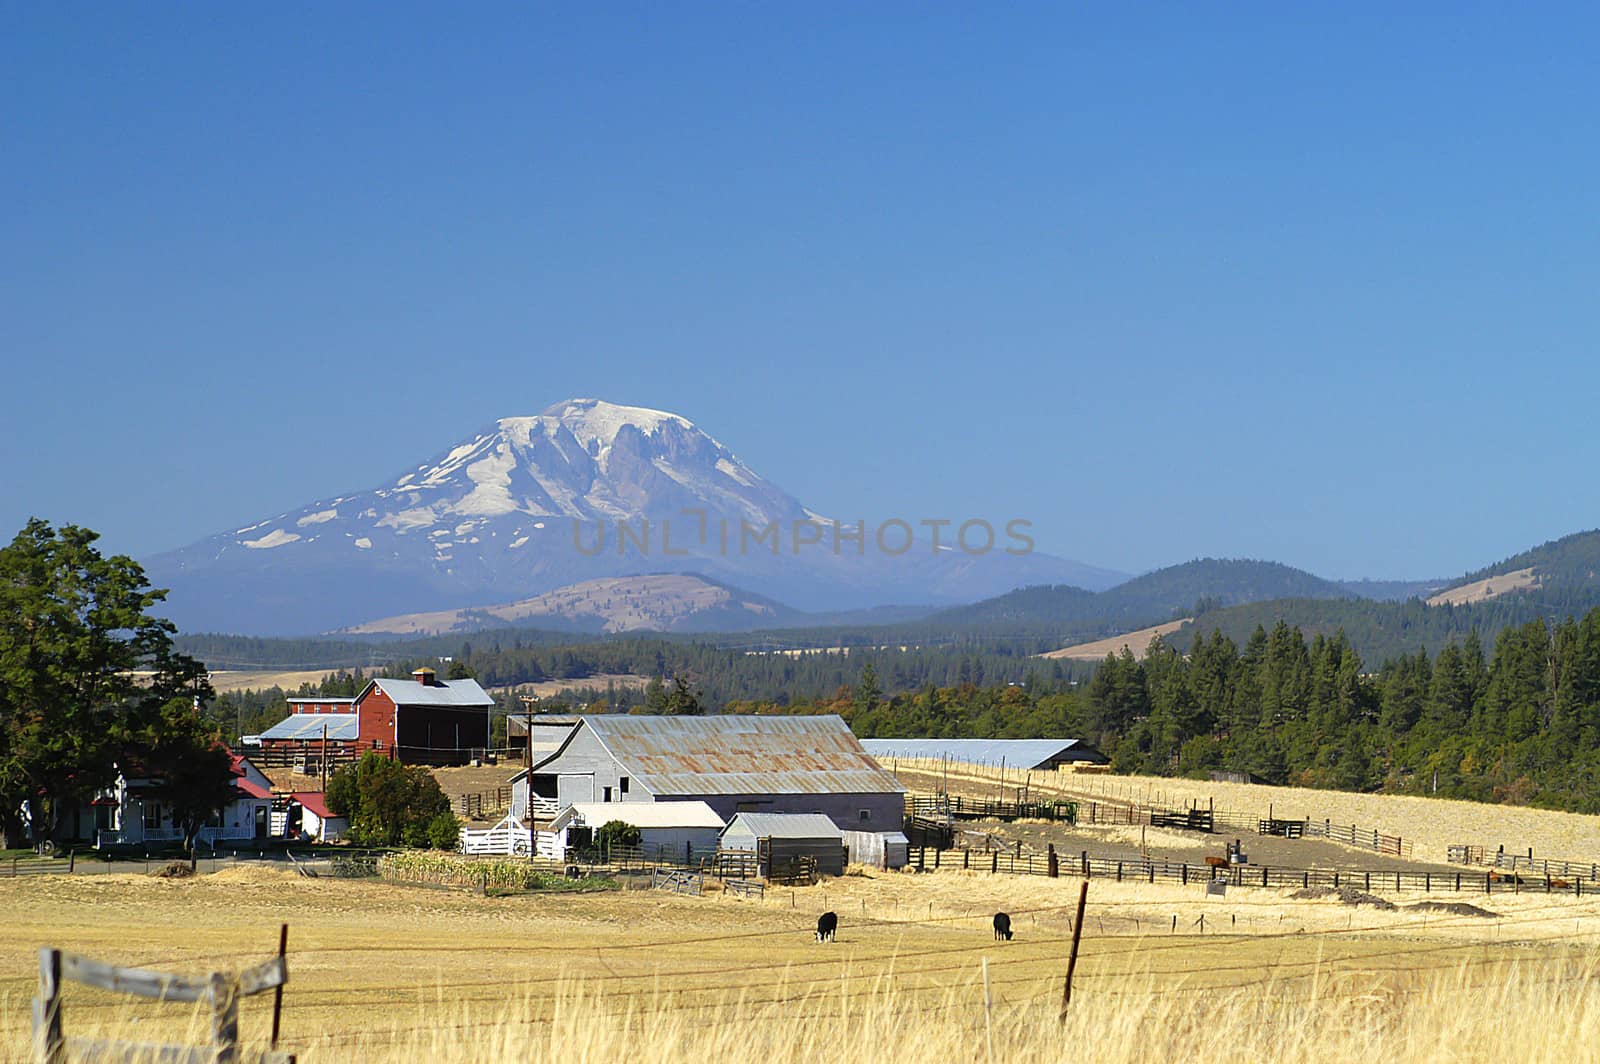 Mt Rainier viewed from Goldendale, WA with farm in foreground